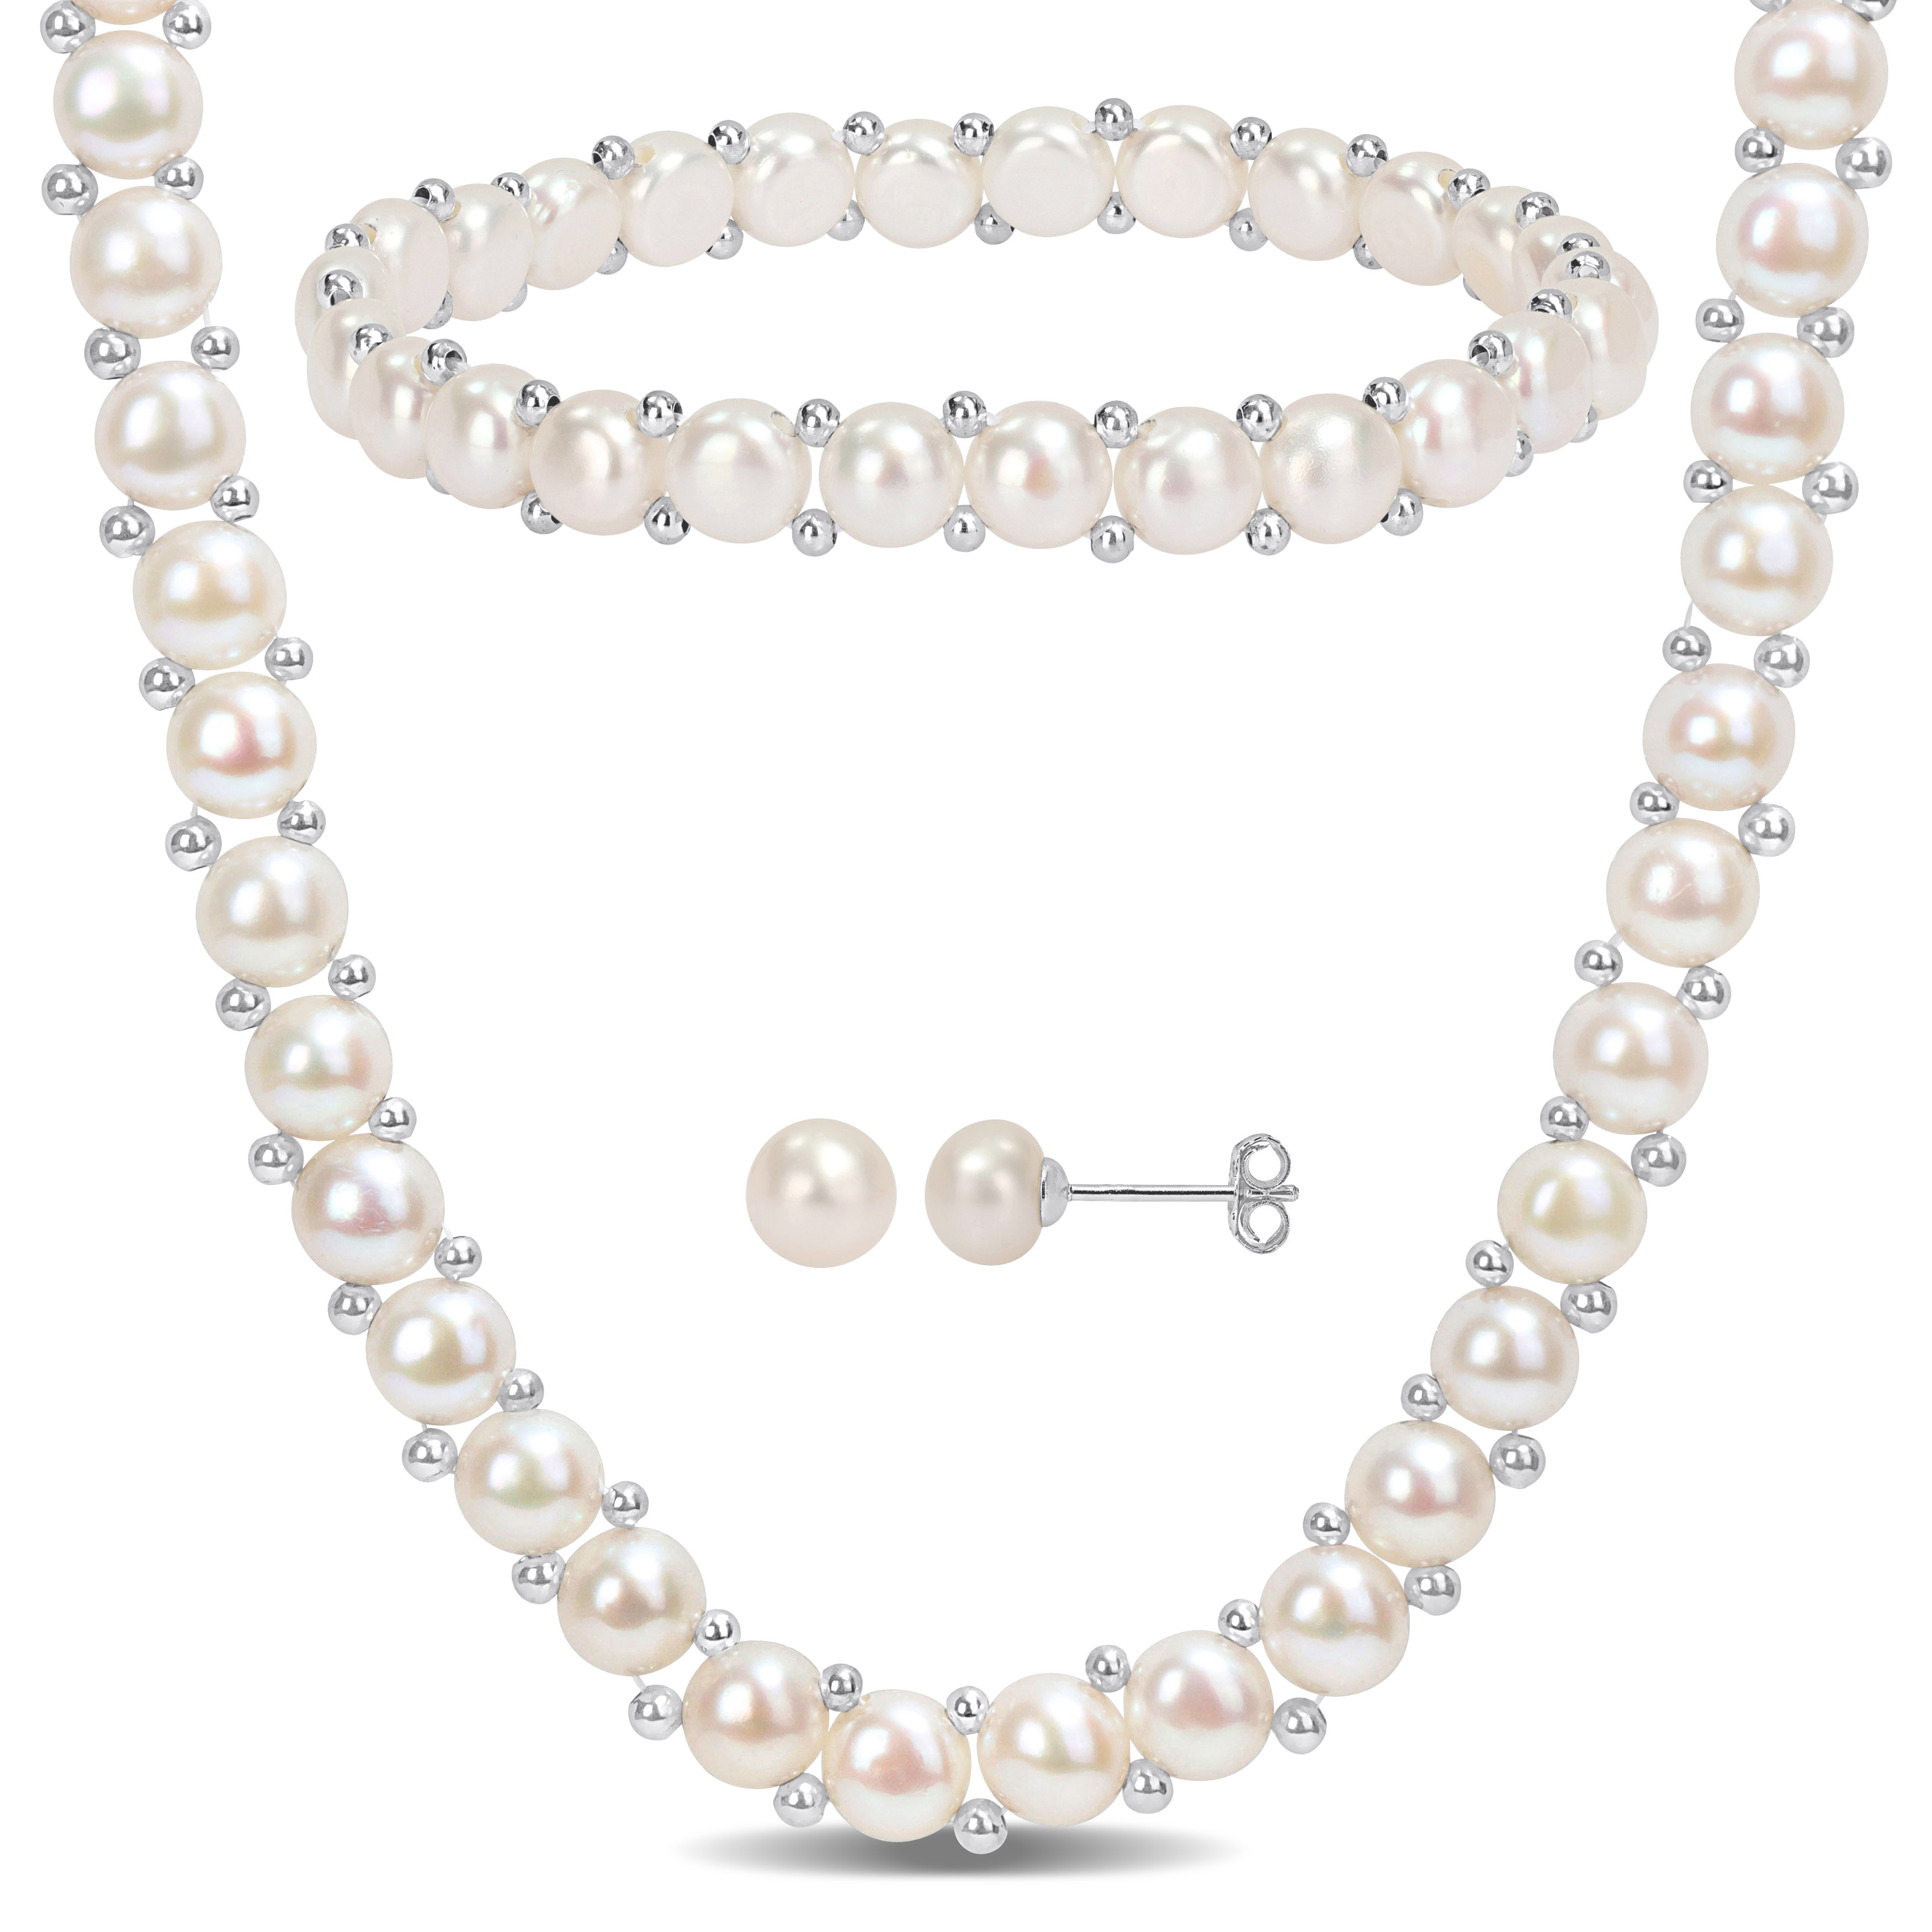 6-7mm & 7-8mm White Cultured Freshwater Button Pearl Strand Necklace, Bracelet and Stud Earrings 3-Piece Set with Sterling Silver